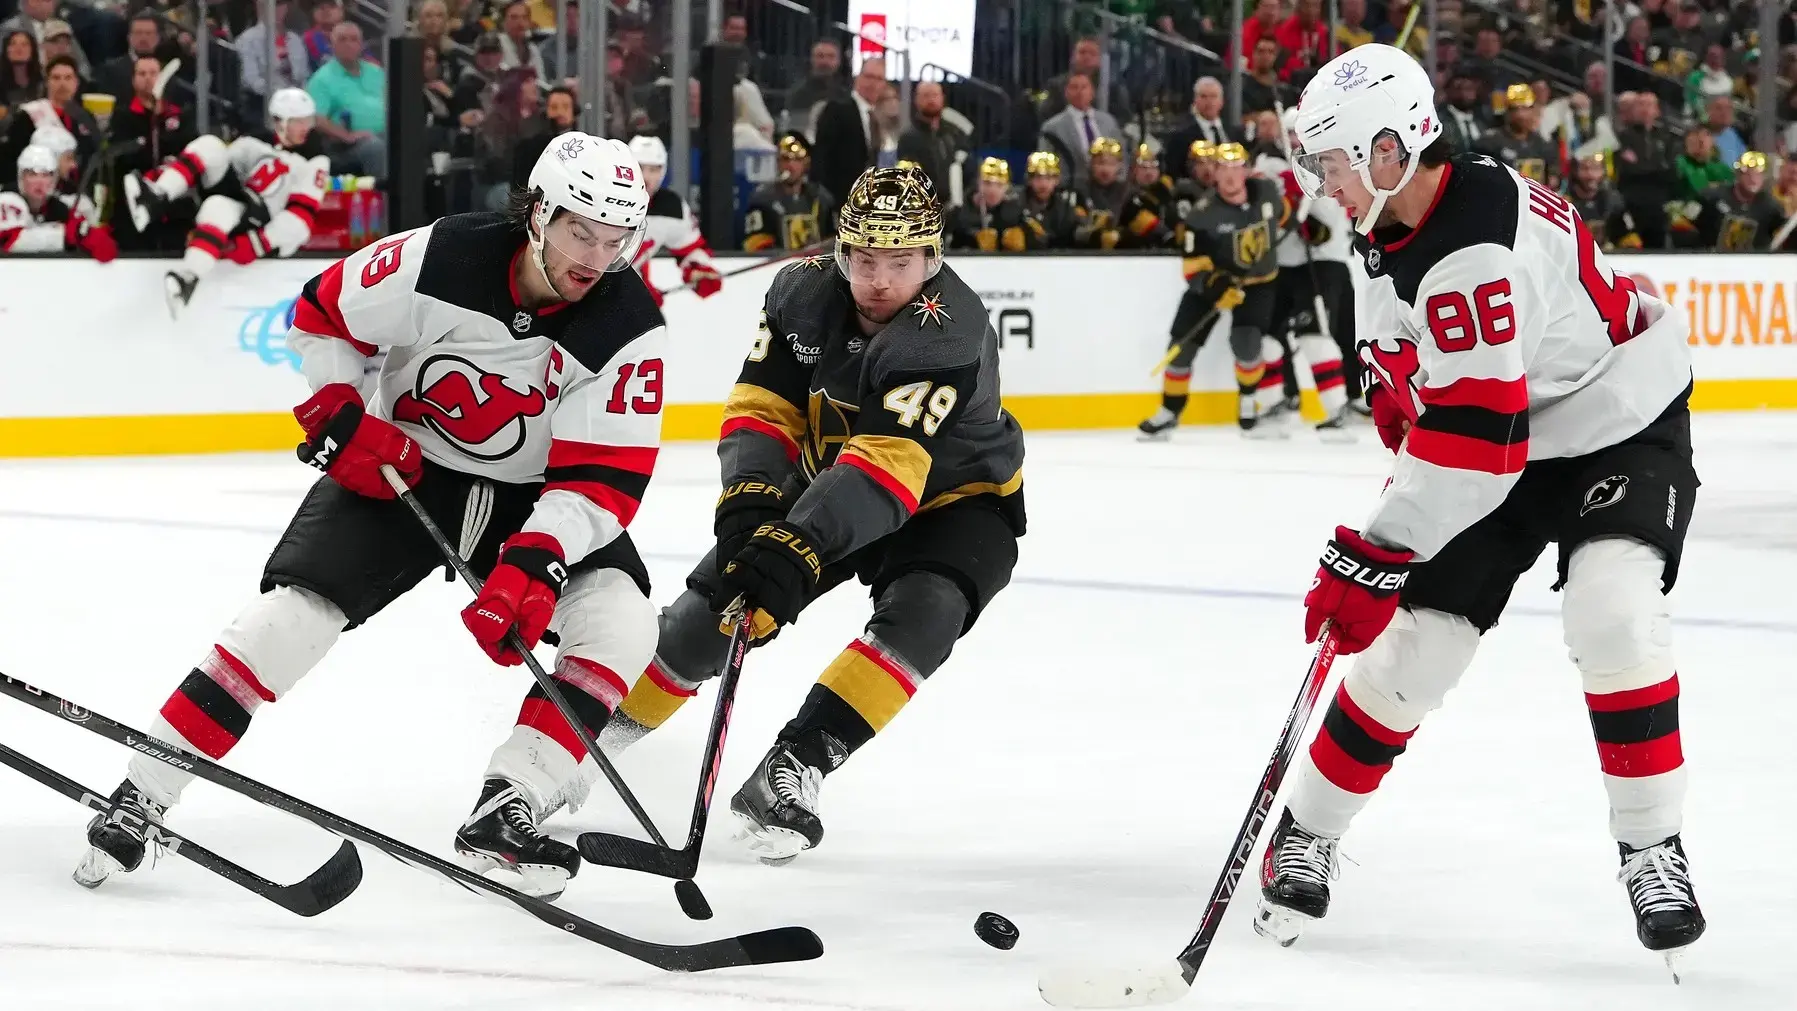 Vegas Golden Knights center Ivan Barbashev (49) misses a pass from New Jersey Devils center Nico Hischier (13) to New Jersey Devils center Jack Hughes (86) during the second period at T-Mobile Arena. / Stephen R. Sylvanie-USA TODAY Sports